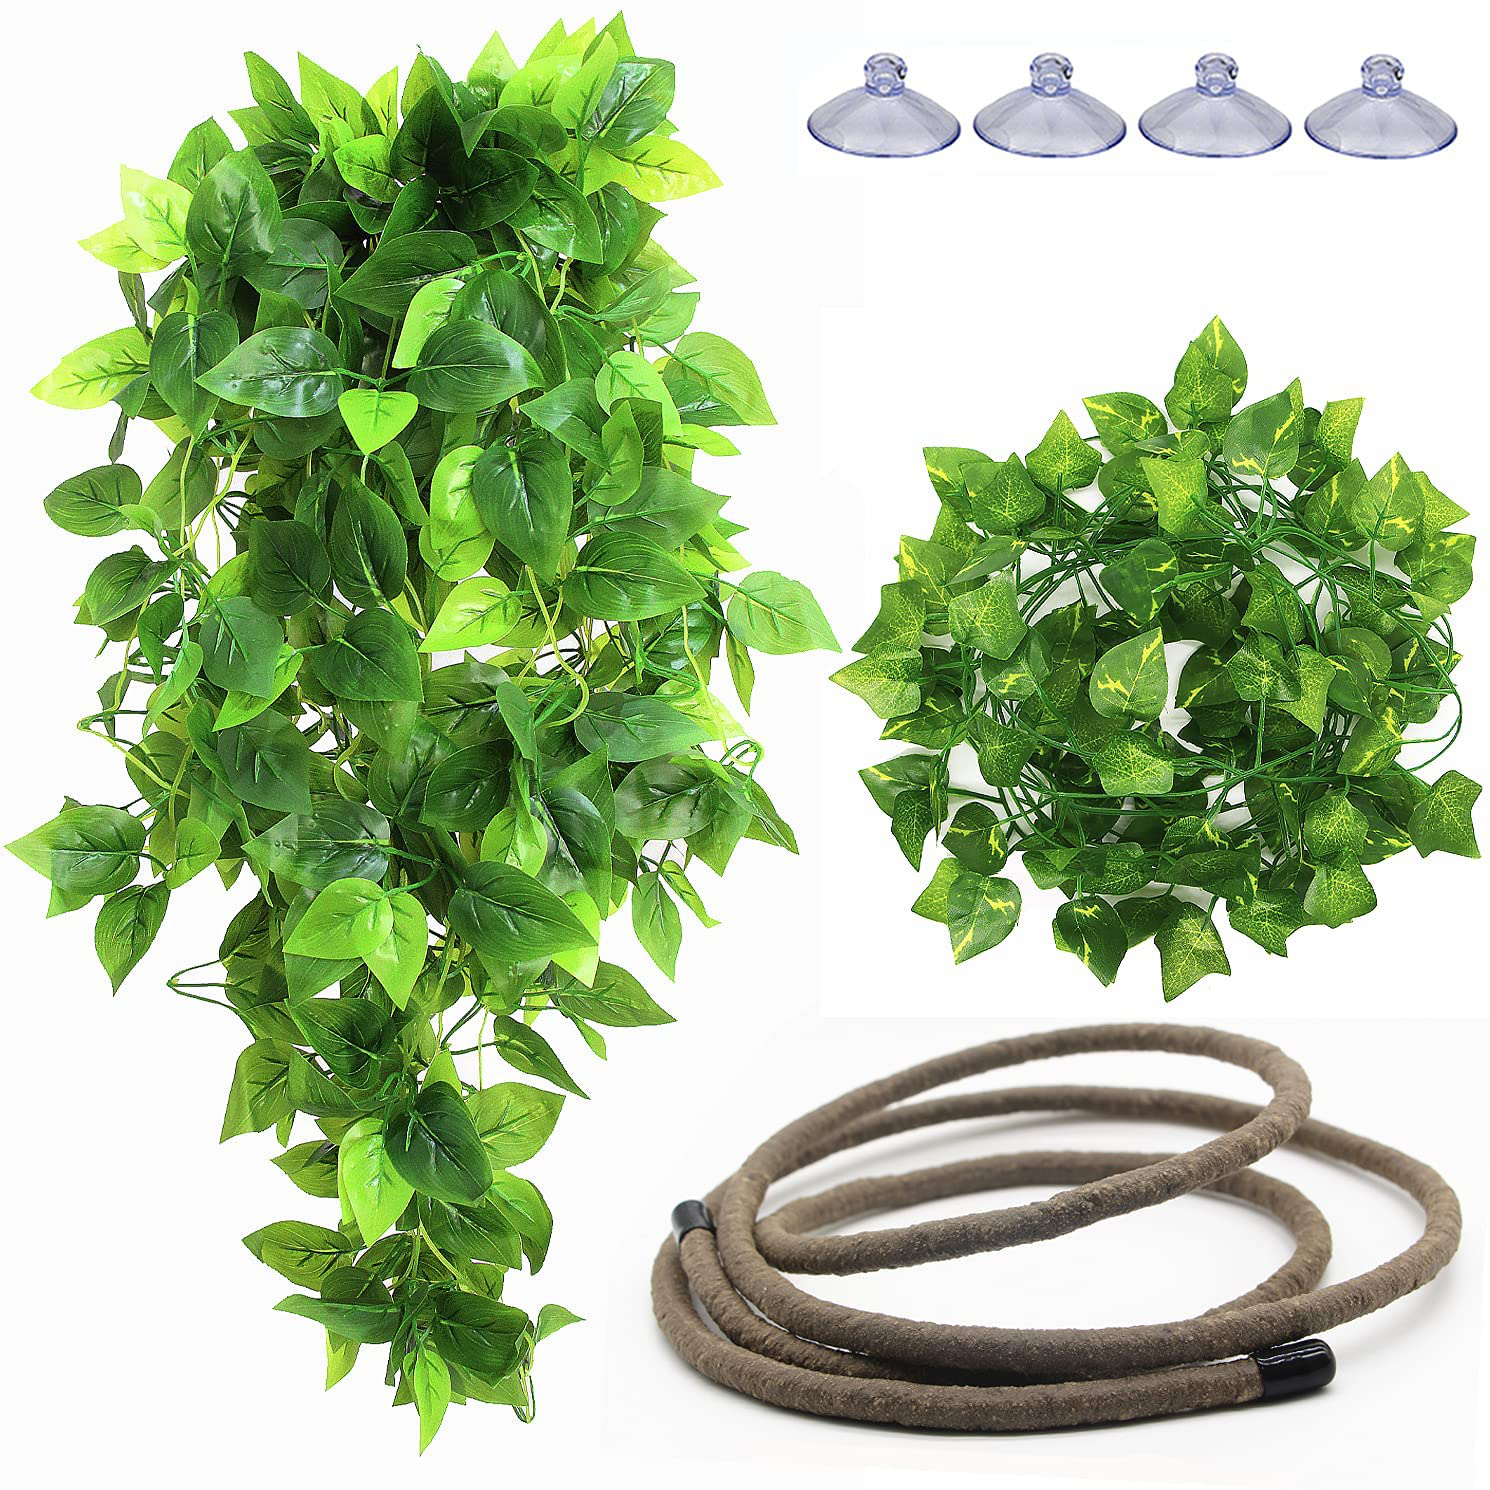 TTEIOPI Reptile Plants, Bendable Hanging Jungle Vines & Artificial Leaves Terrarium Tank Fake Plants Habitat Decorations with Suction Cup for Bearded Dragon Hermit Crab Lizard Snake Geckos Chameleon.